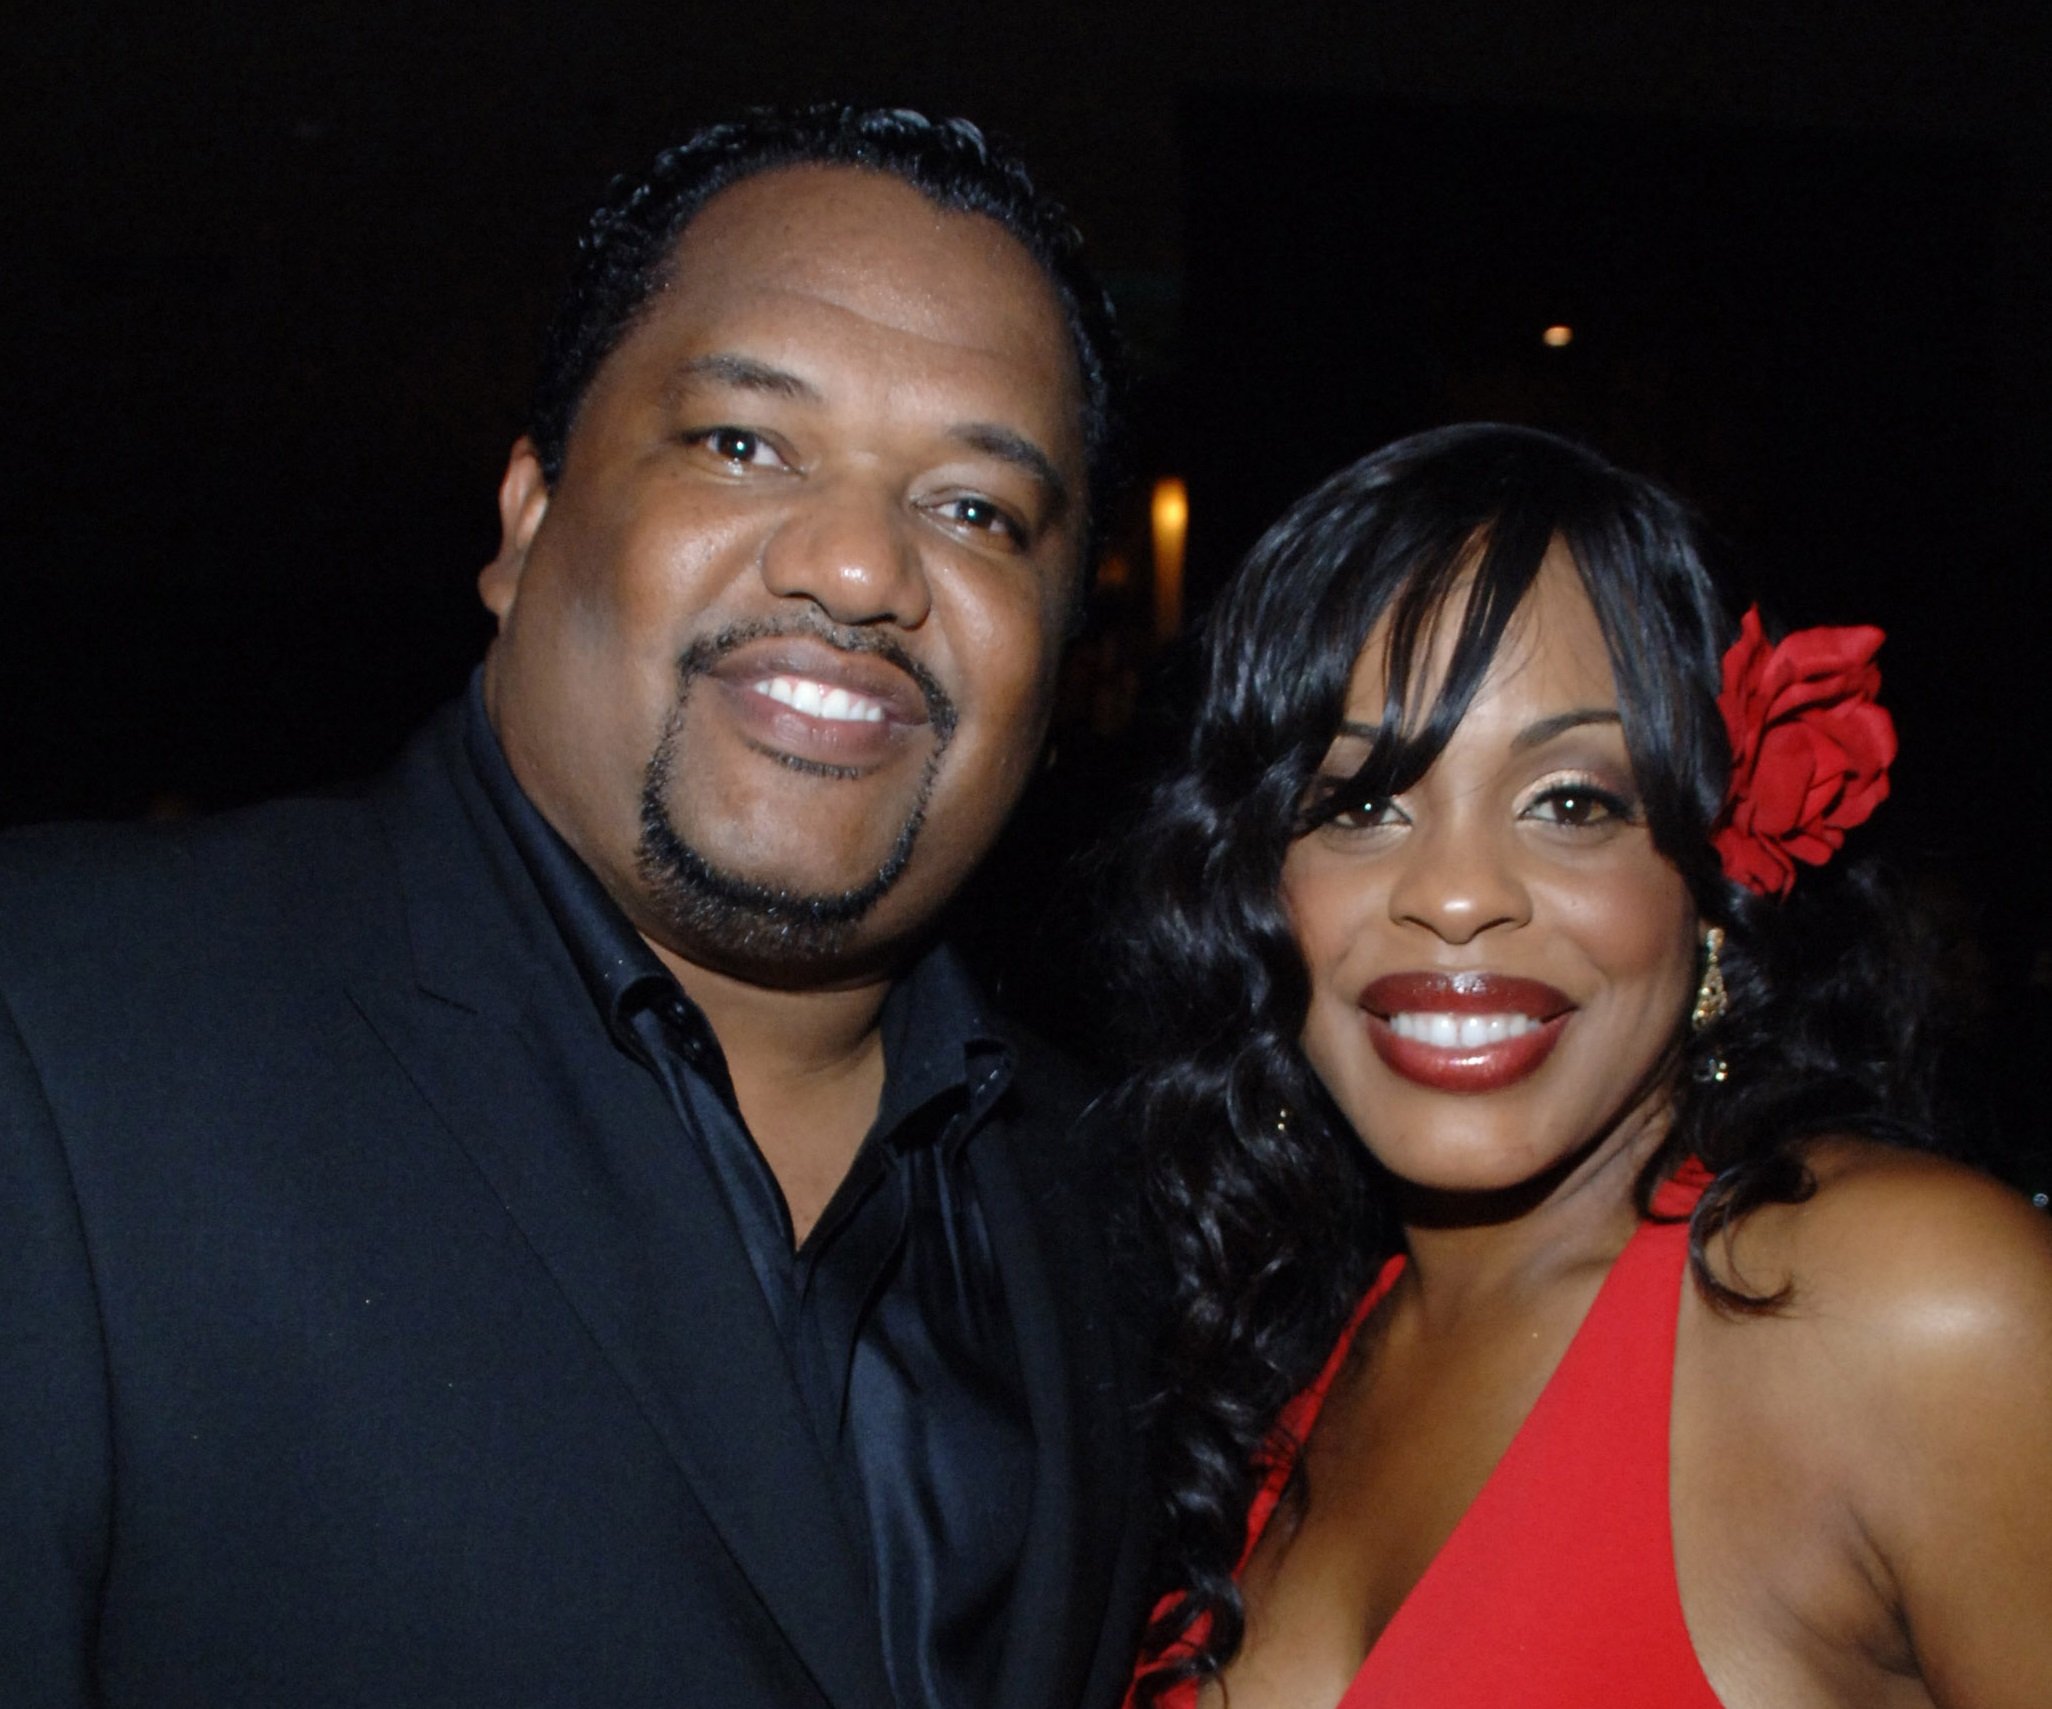 How Many Times Has Niecy Nash Been Married? The ‘Reno 911’ Star Tied the Knot Again in 2020